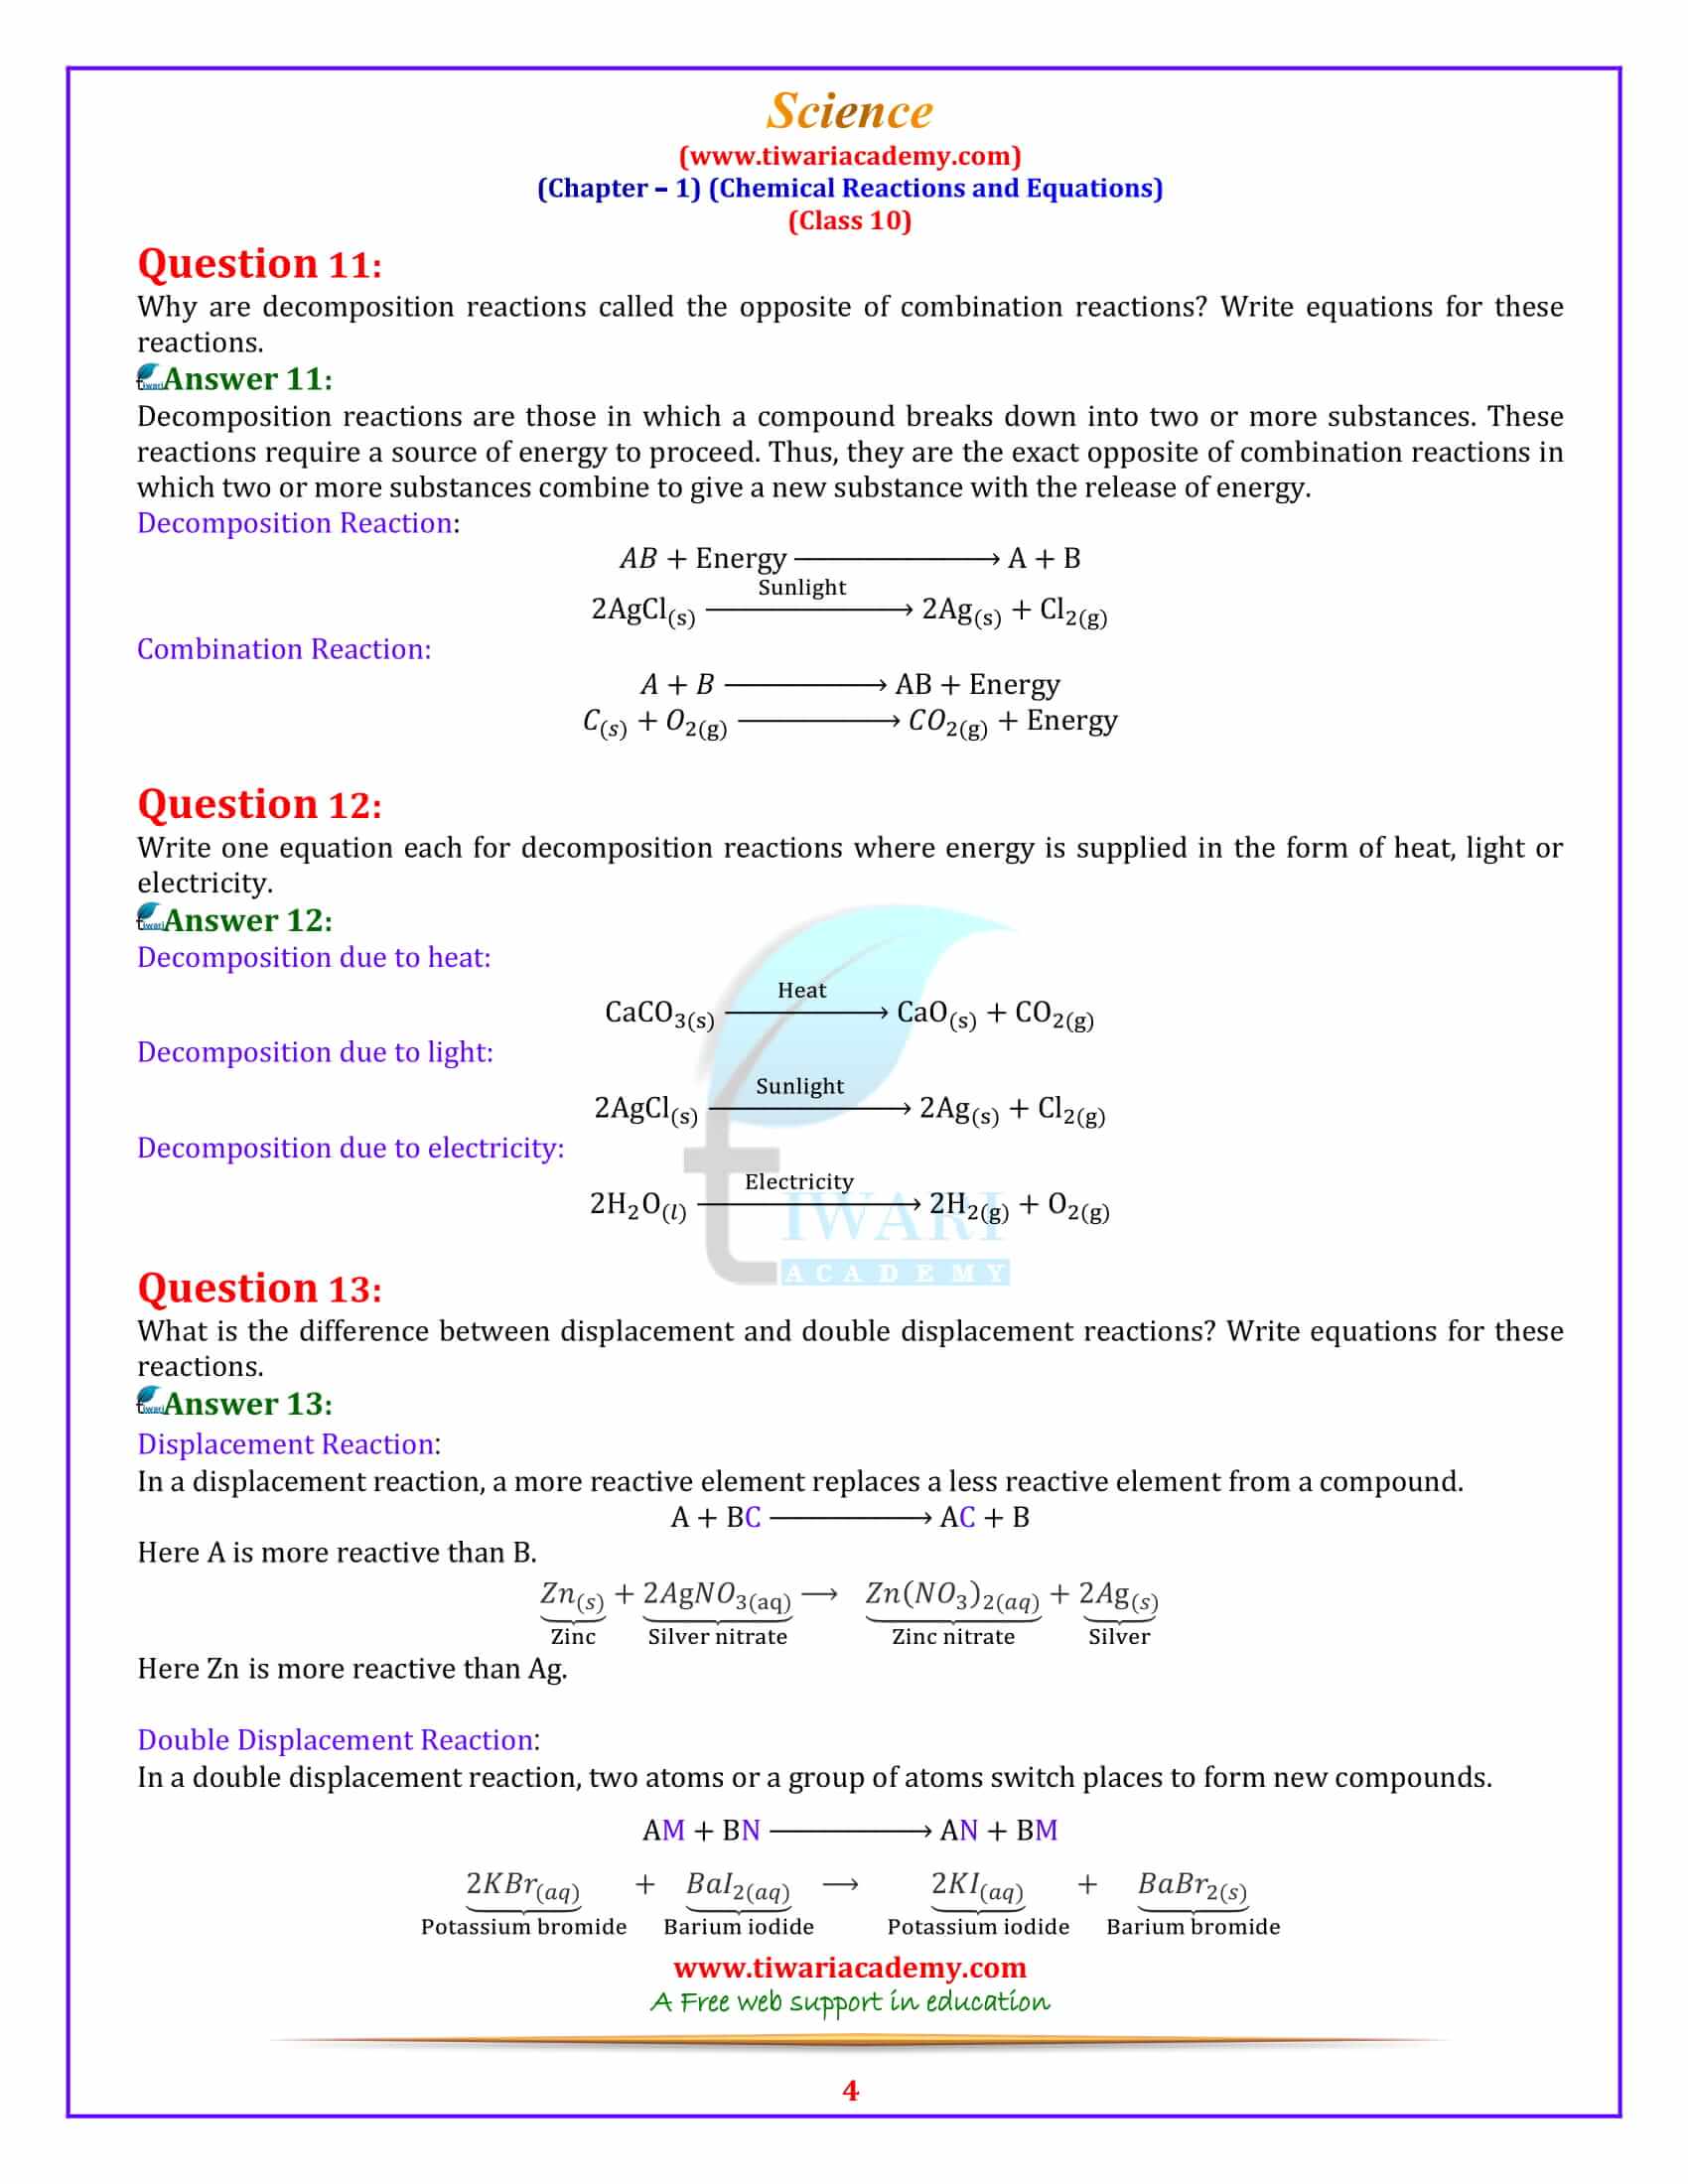 NCERT Solutions for Class 10 Science Chapter 1 Exercises in english medium